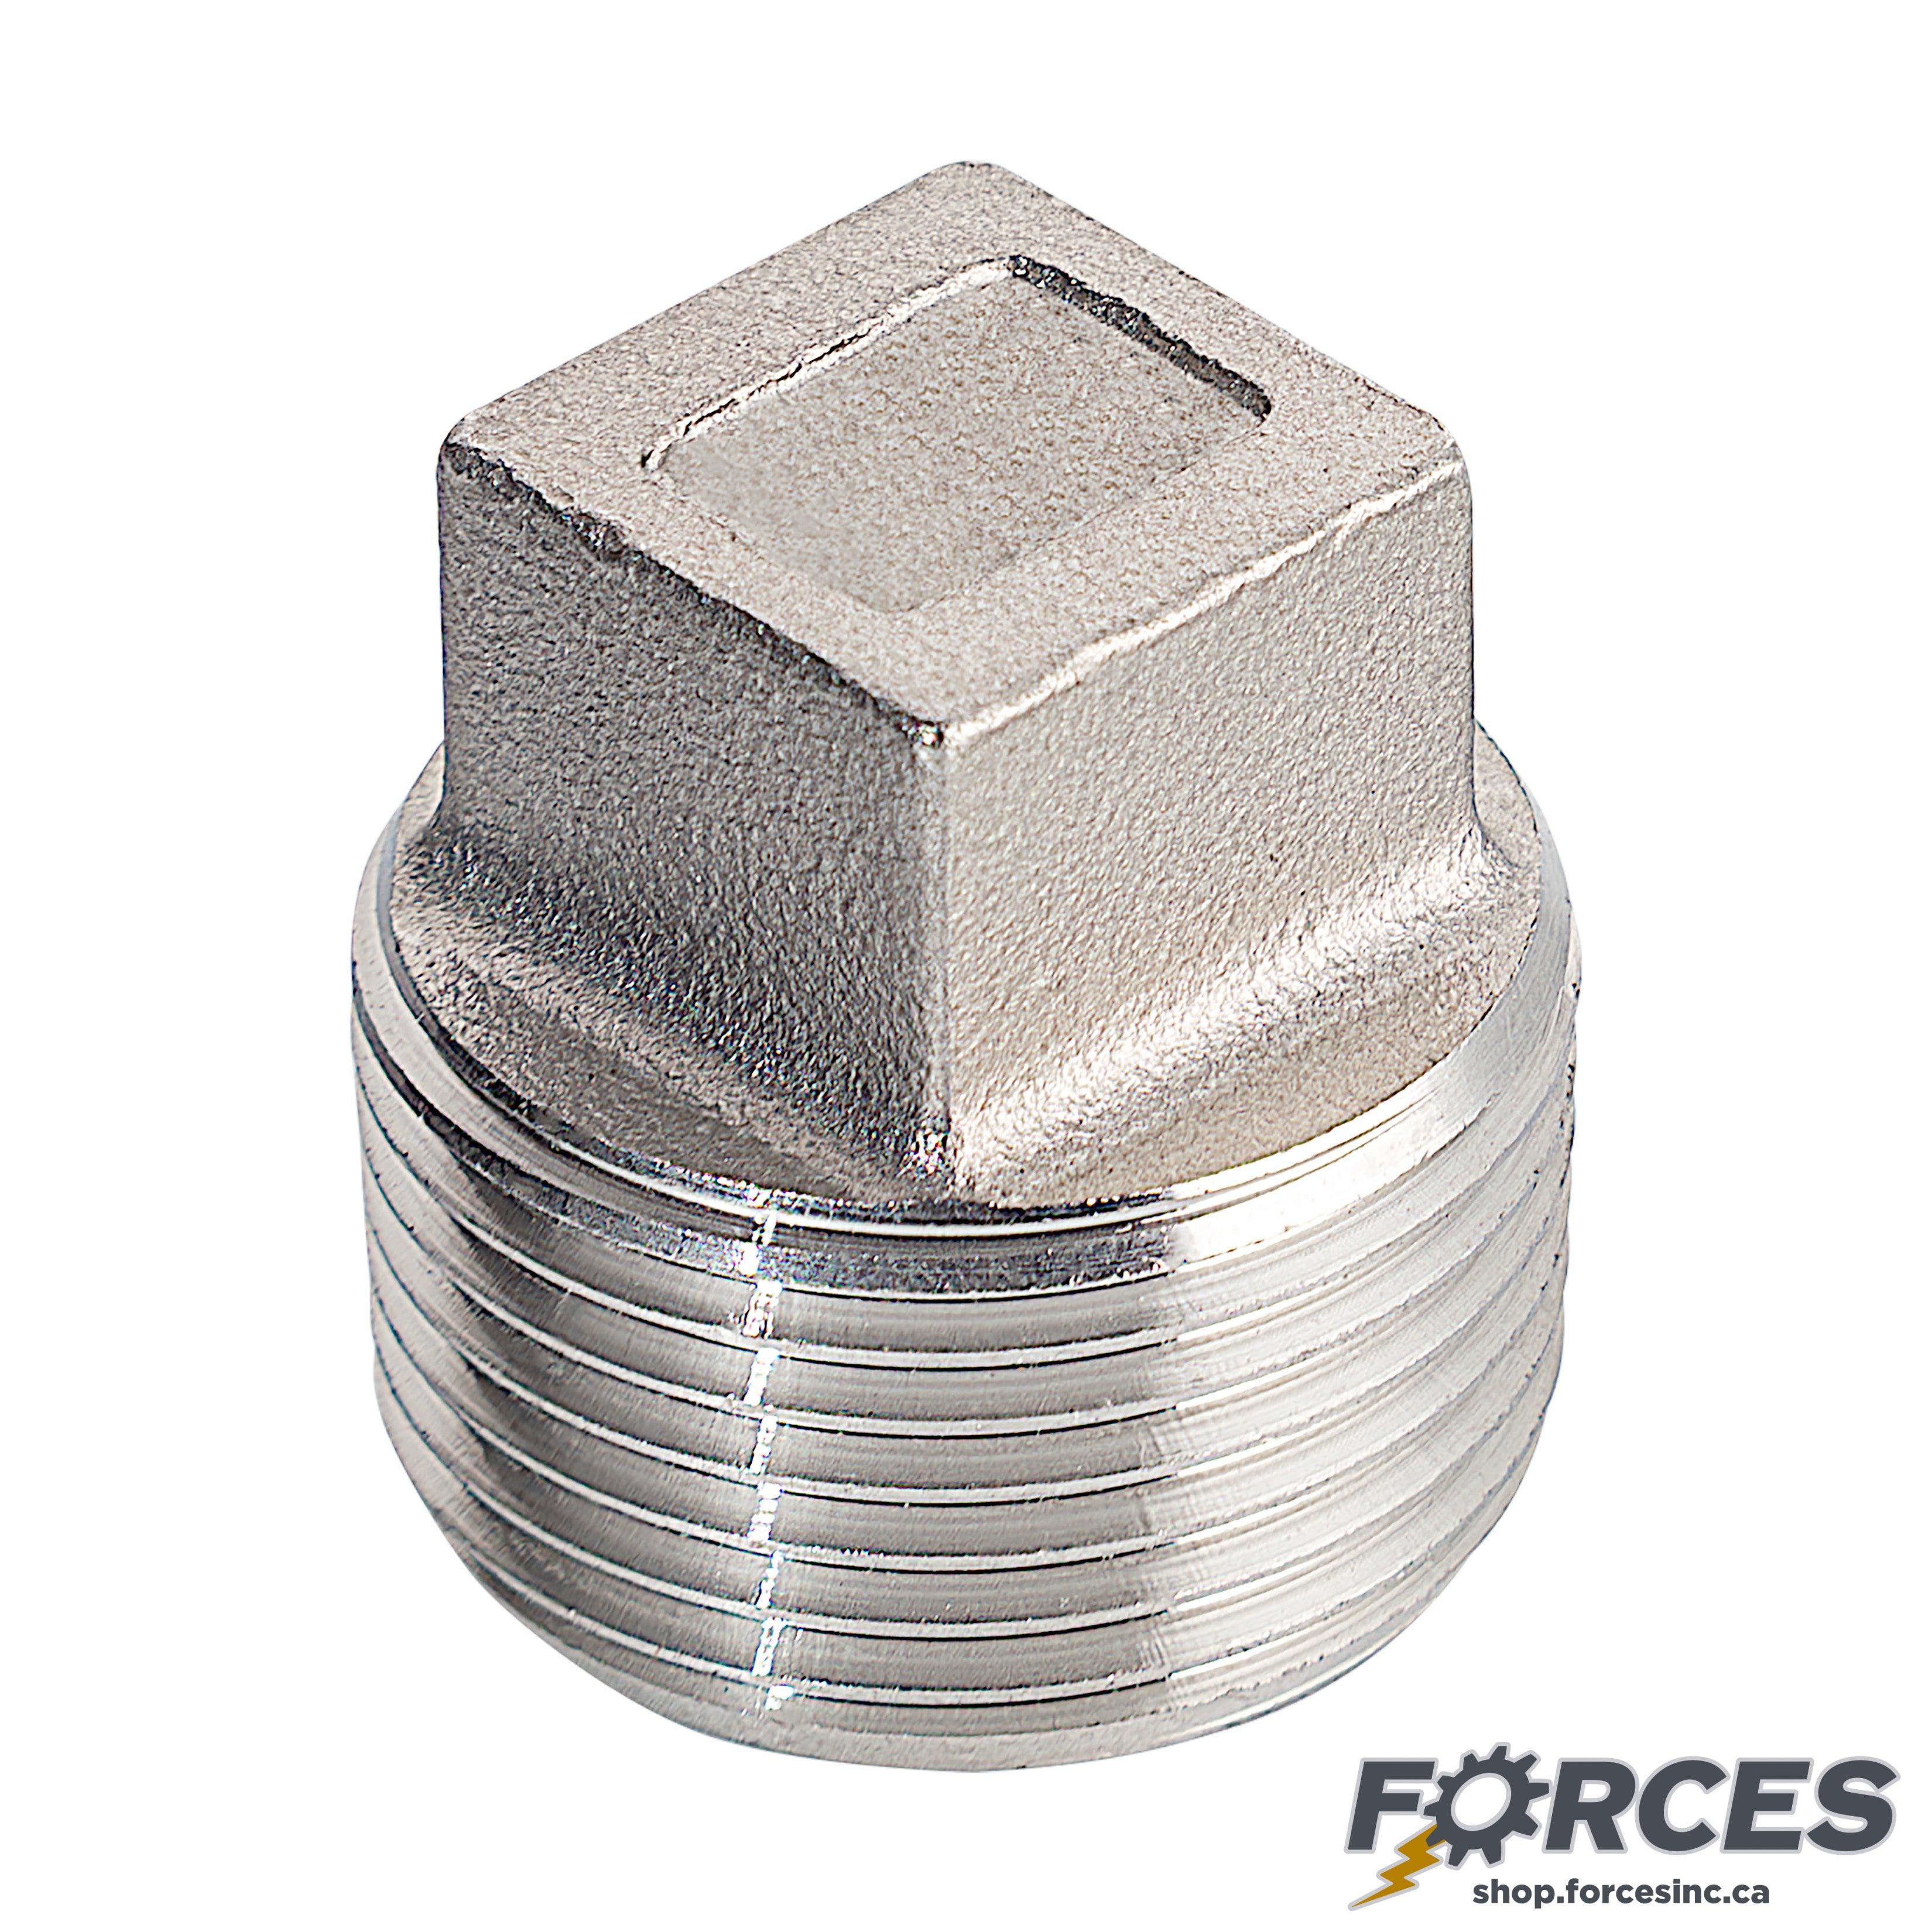 1/4" Square Plug NPT #150 - Stainless Steel 316 - Forces Inc